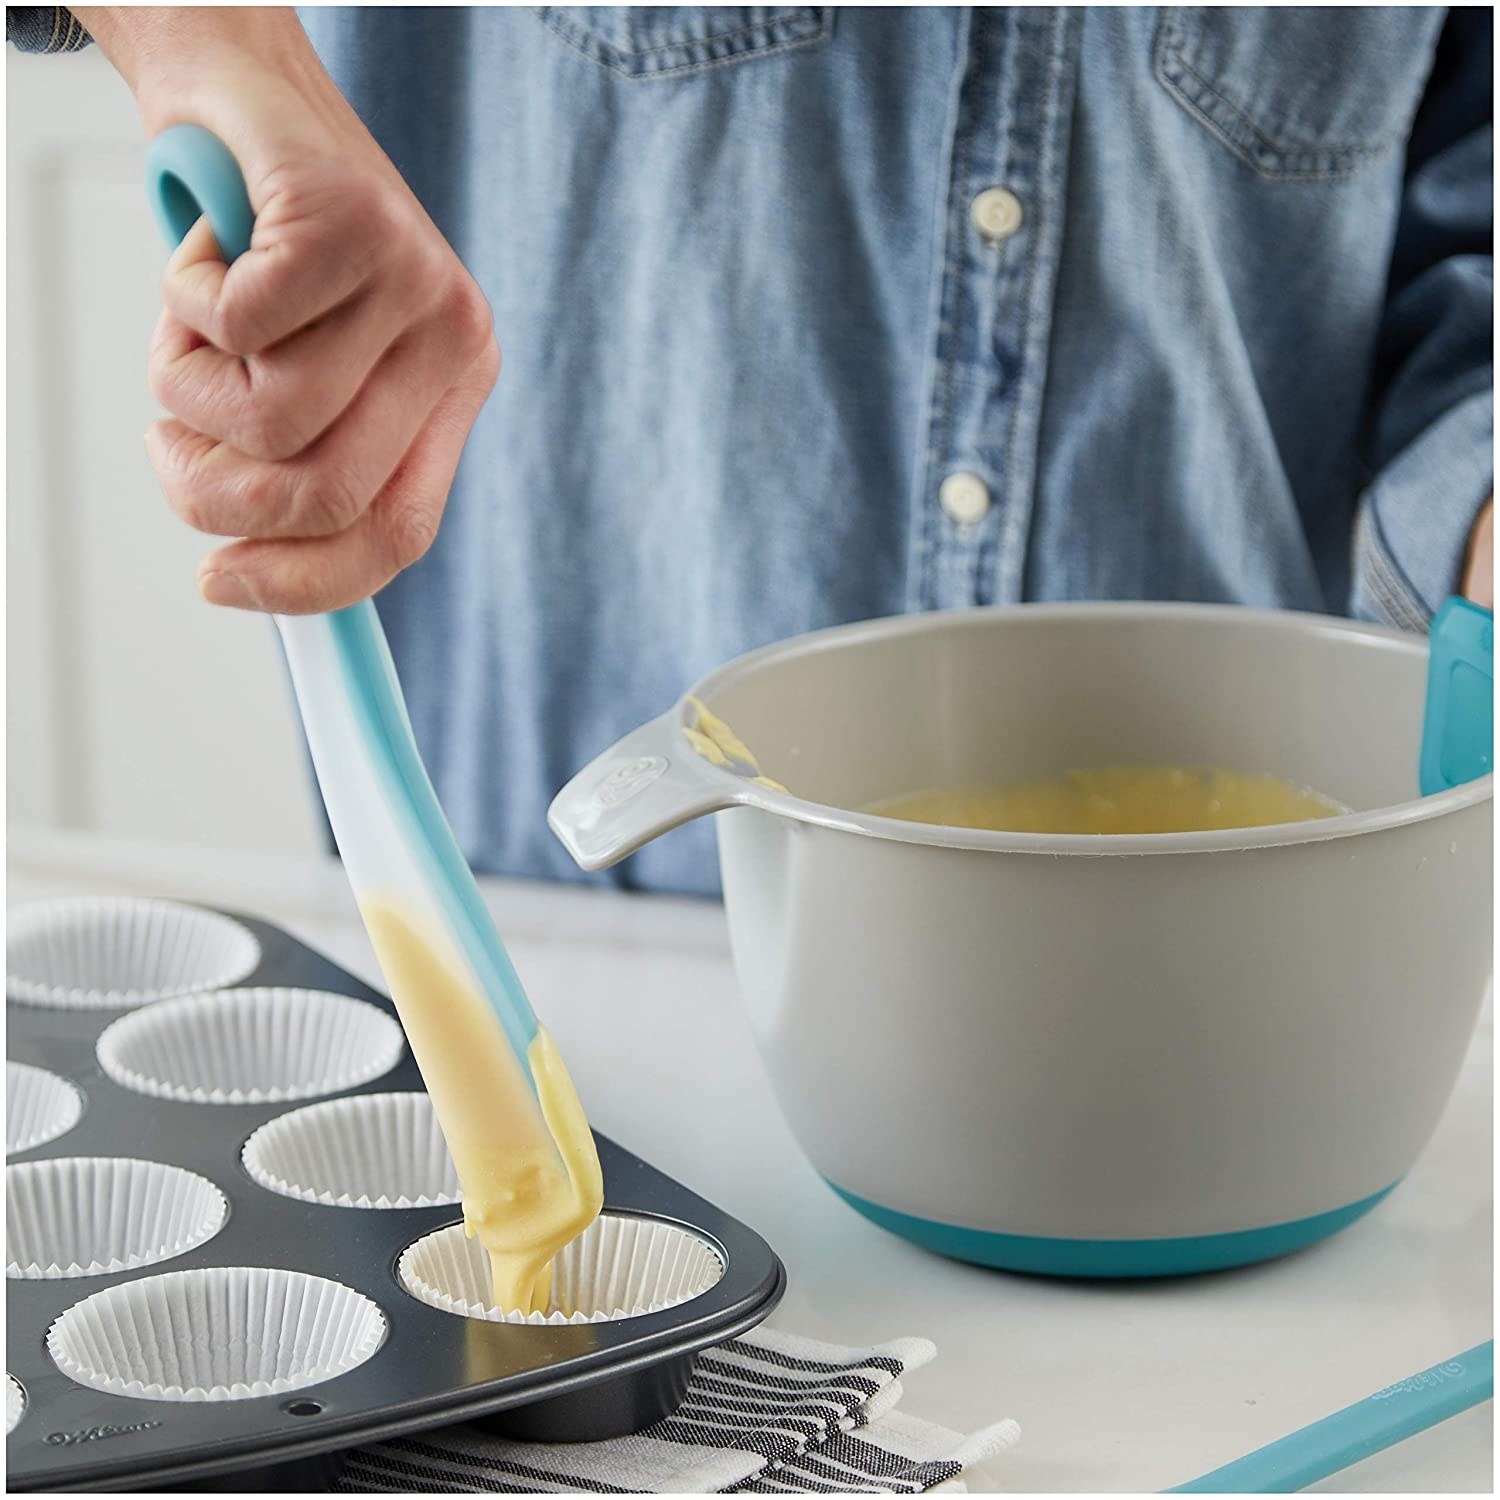 A person squeezing the spatula and scooping cupcake batter into a muffin tin